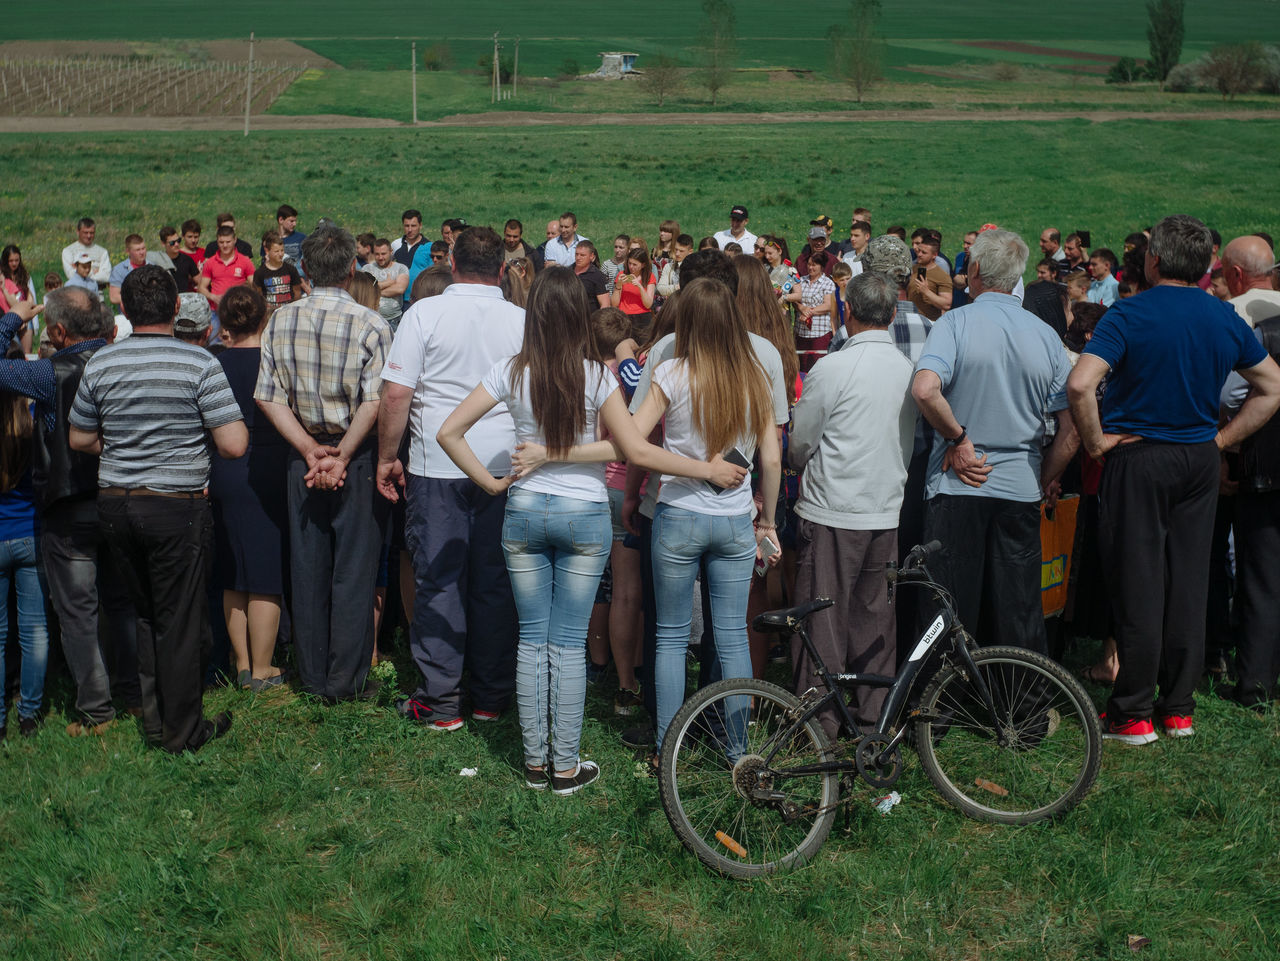 group of people, crowd, large group of people, real people, grass, men, field, land, plant, day, leisure activity, women, nature, lifestyles, bicycle, transportation, casual clothing, spectator, adult, outdoors